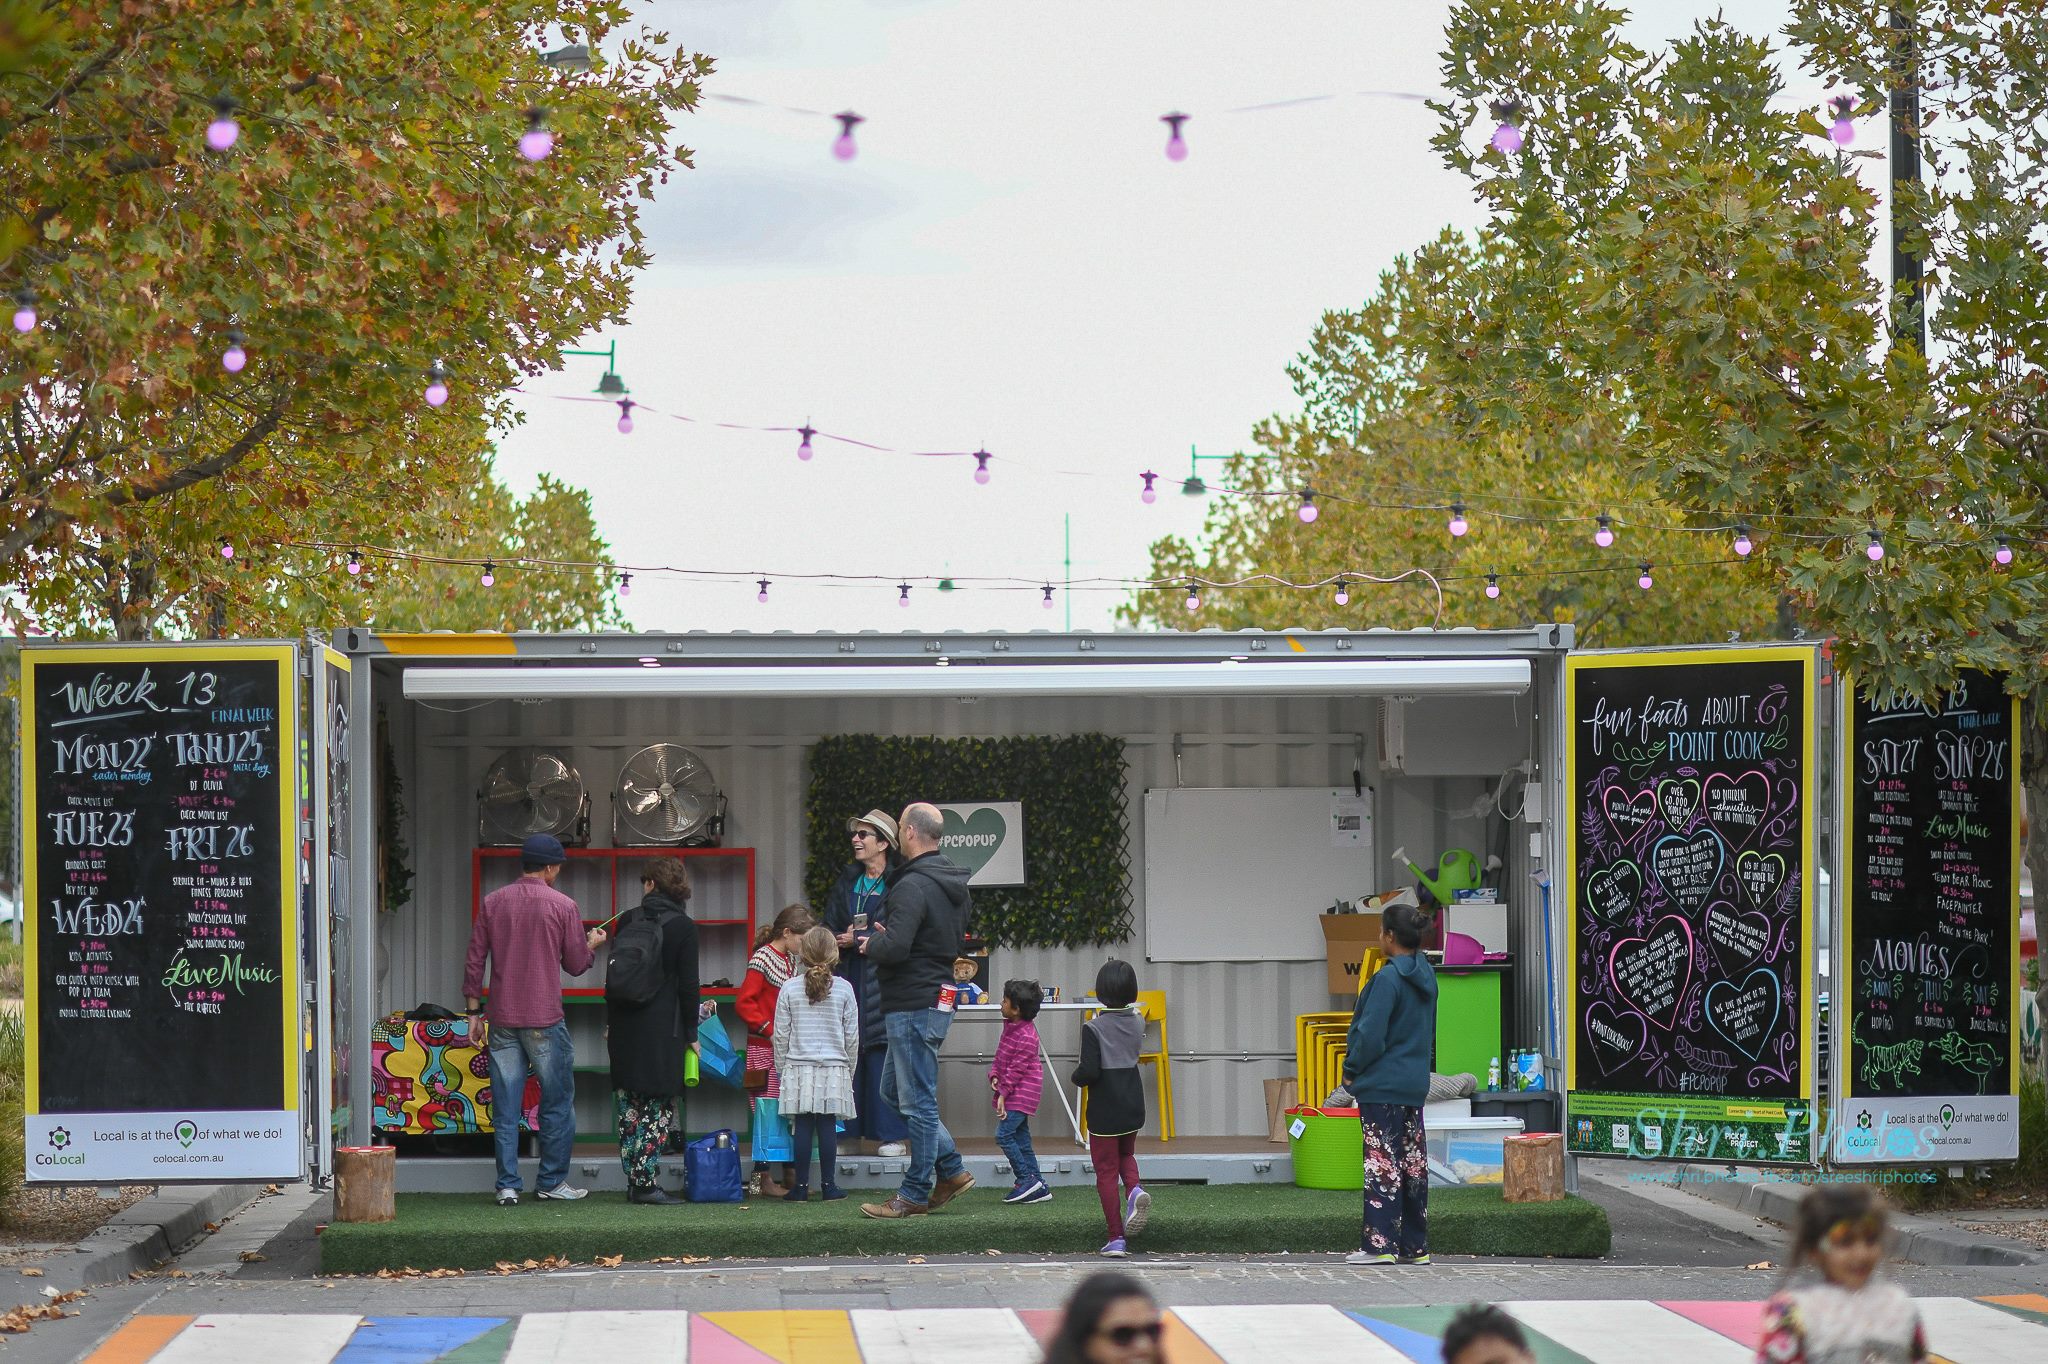 Point Cook Pop Up Park Shipping Container with signage on left and right sides